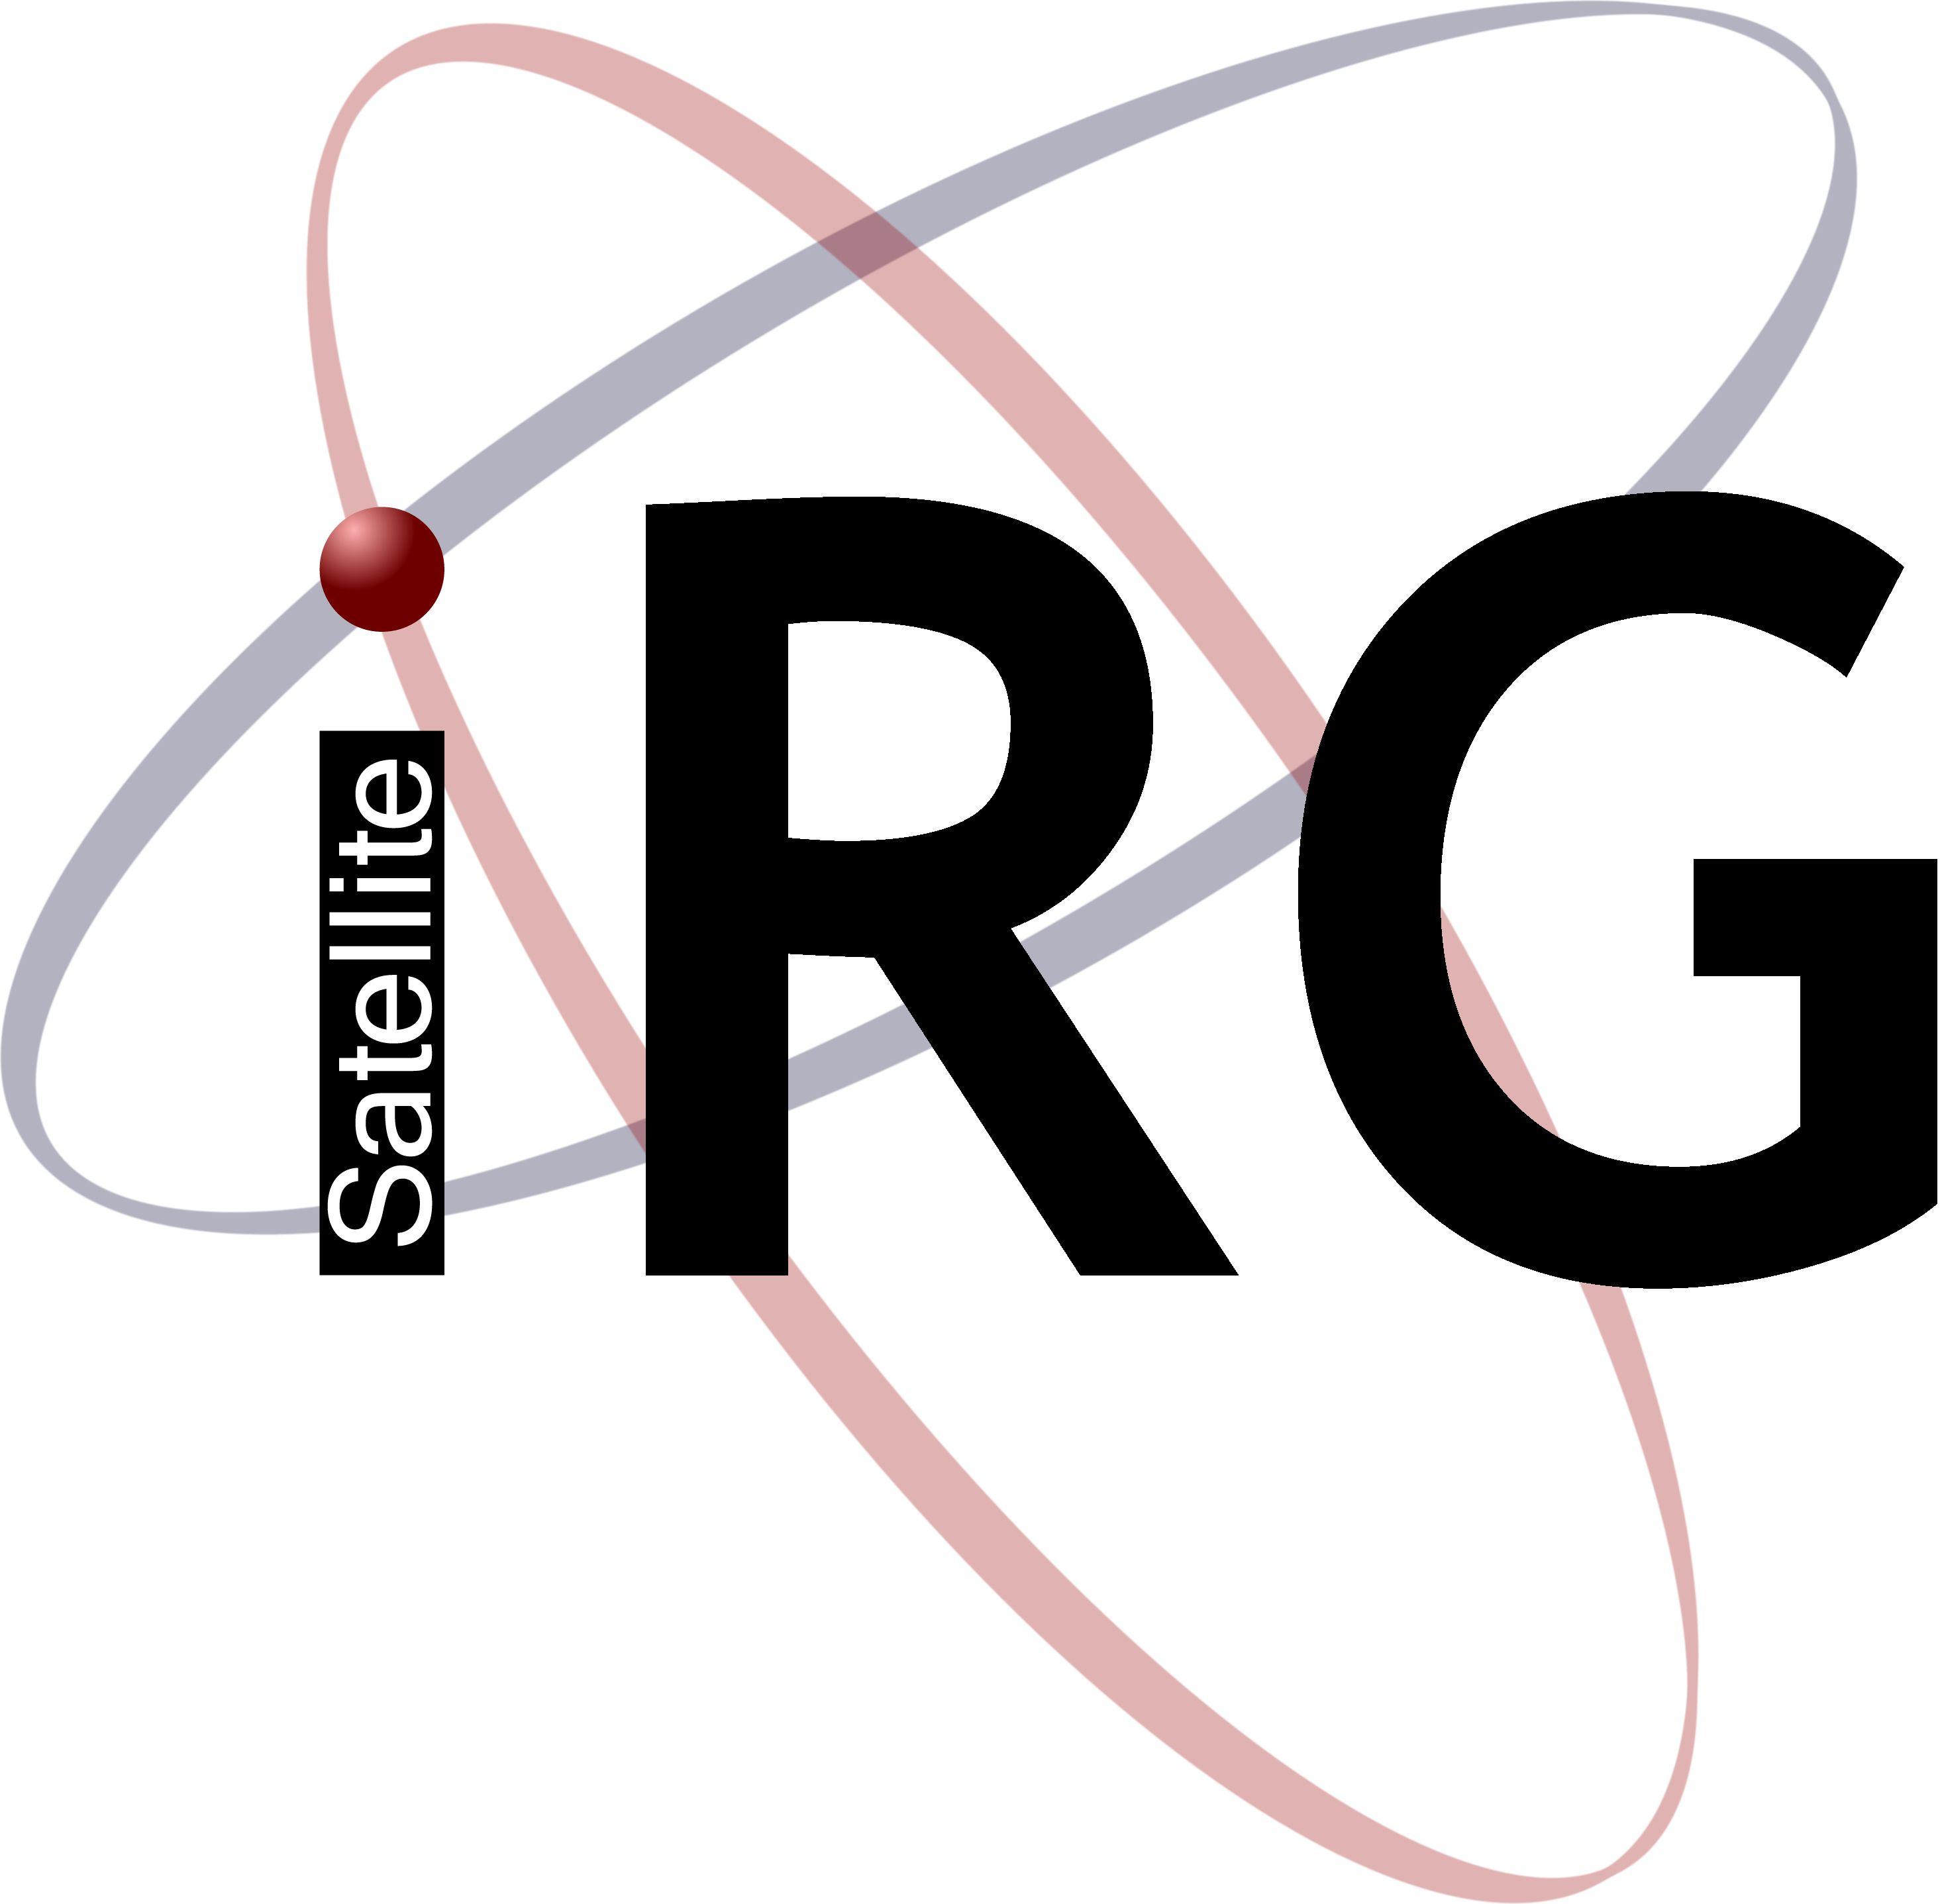 IRG Logo - Images to Download | Satcoms Innovation Group